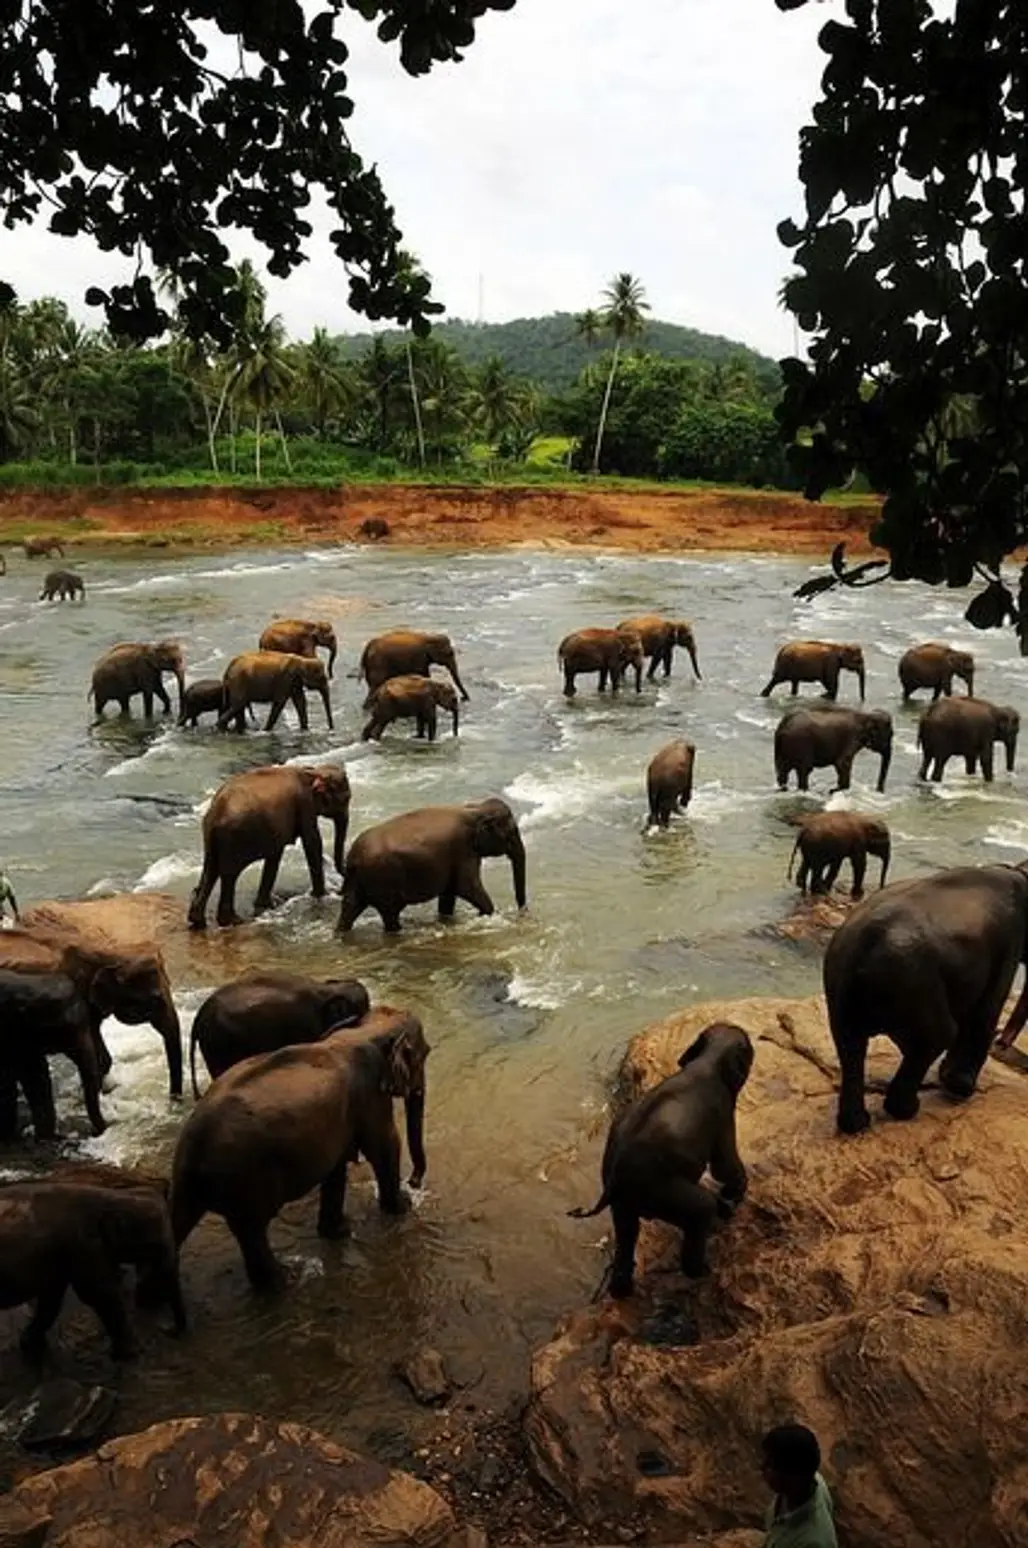 Watch the Goings on at the Elephant Orphanage